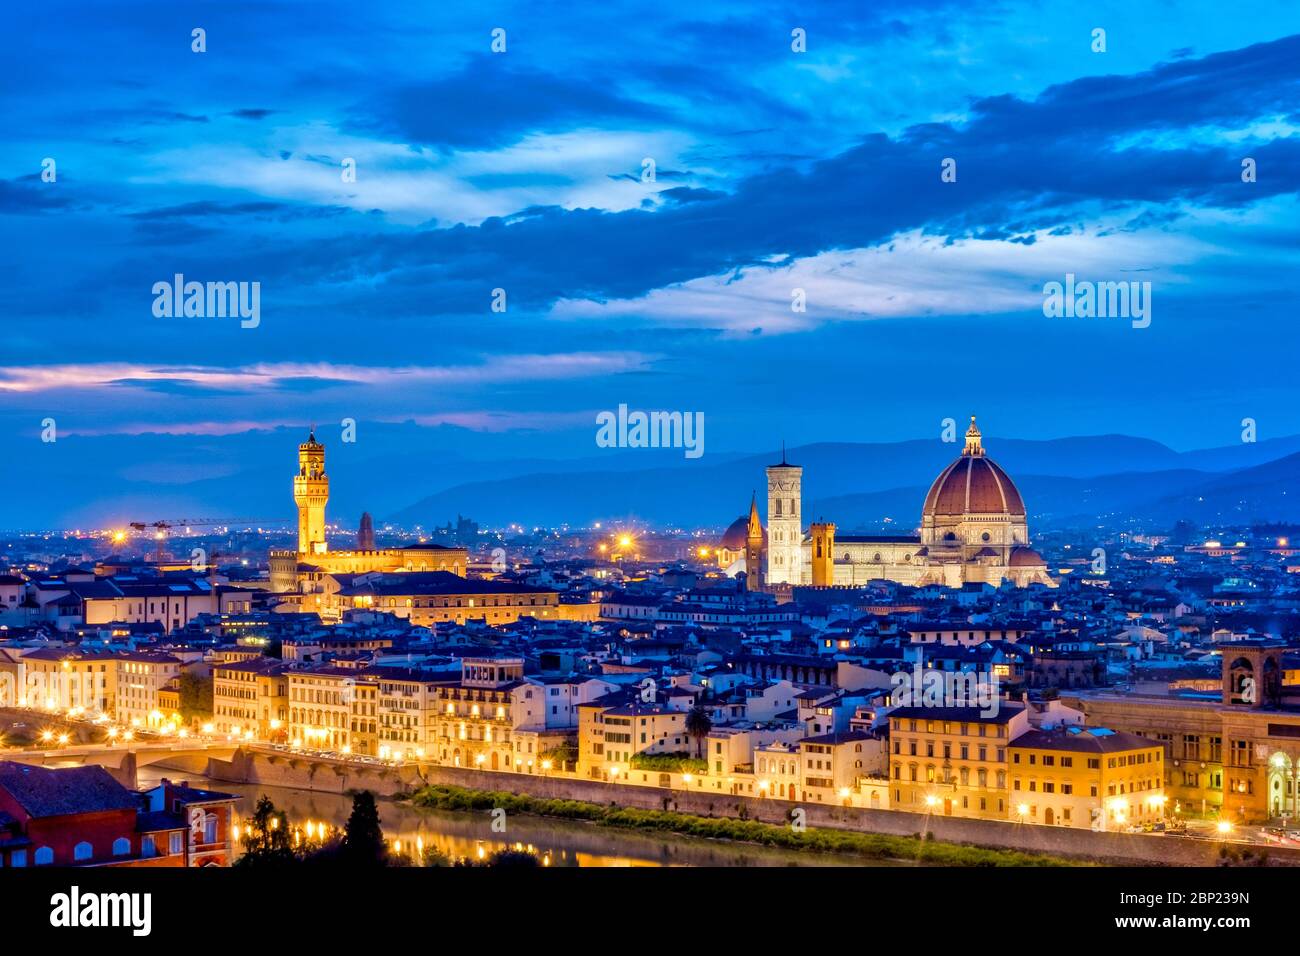 View of Palazzo Vecchio and the Duomo di Firenze from Piazzale Michelangelo, Florence, Italy Stock Photo